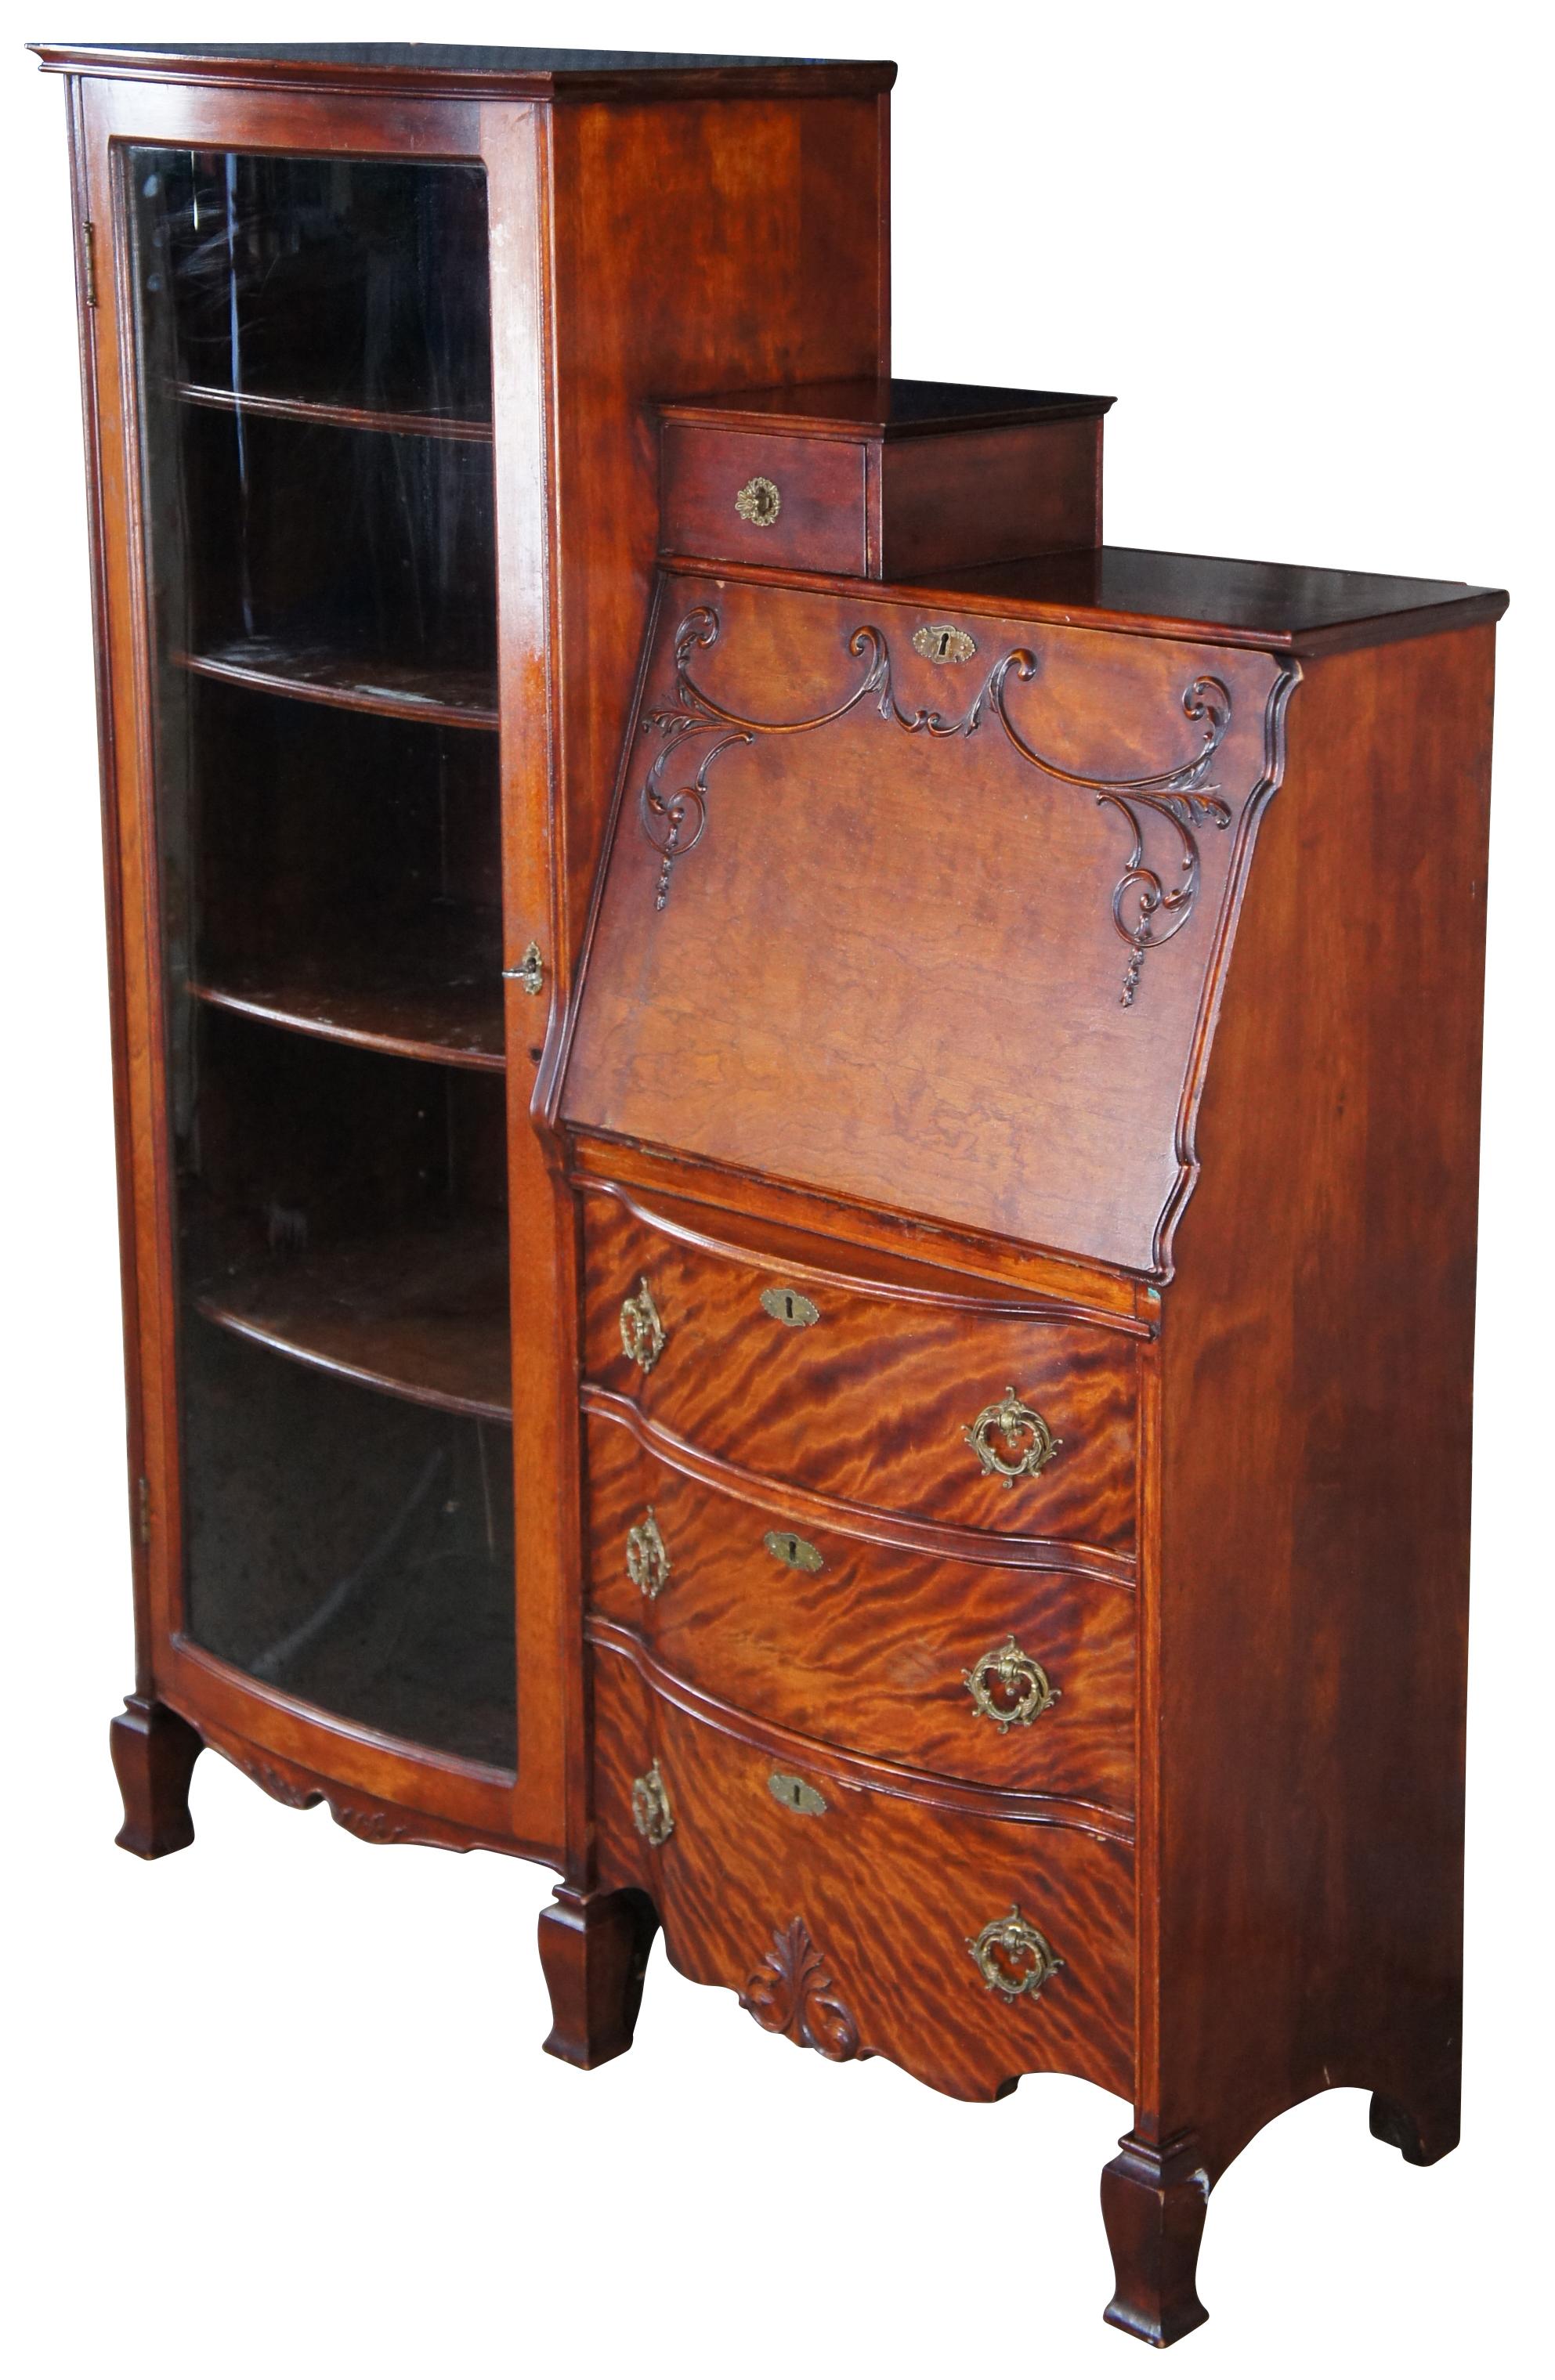 Antique Victorian side by side secretary desk and curio bookcase, circa 1900s. Made of quartersawn or 